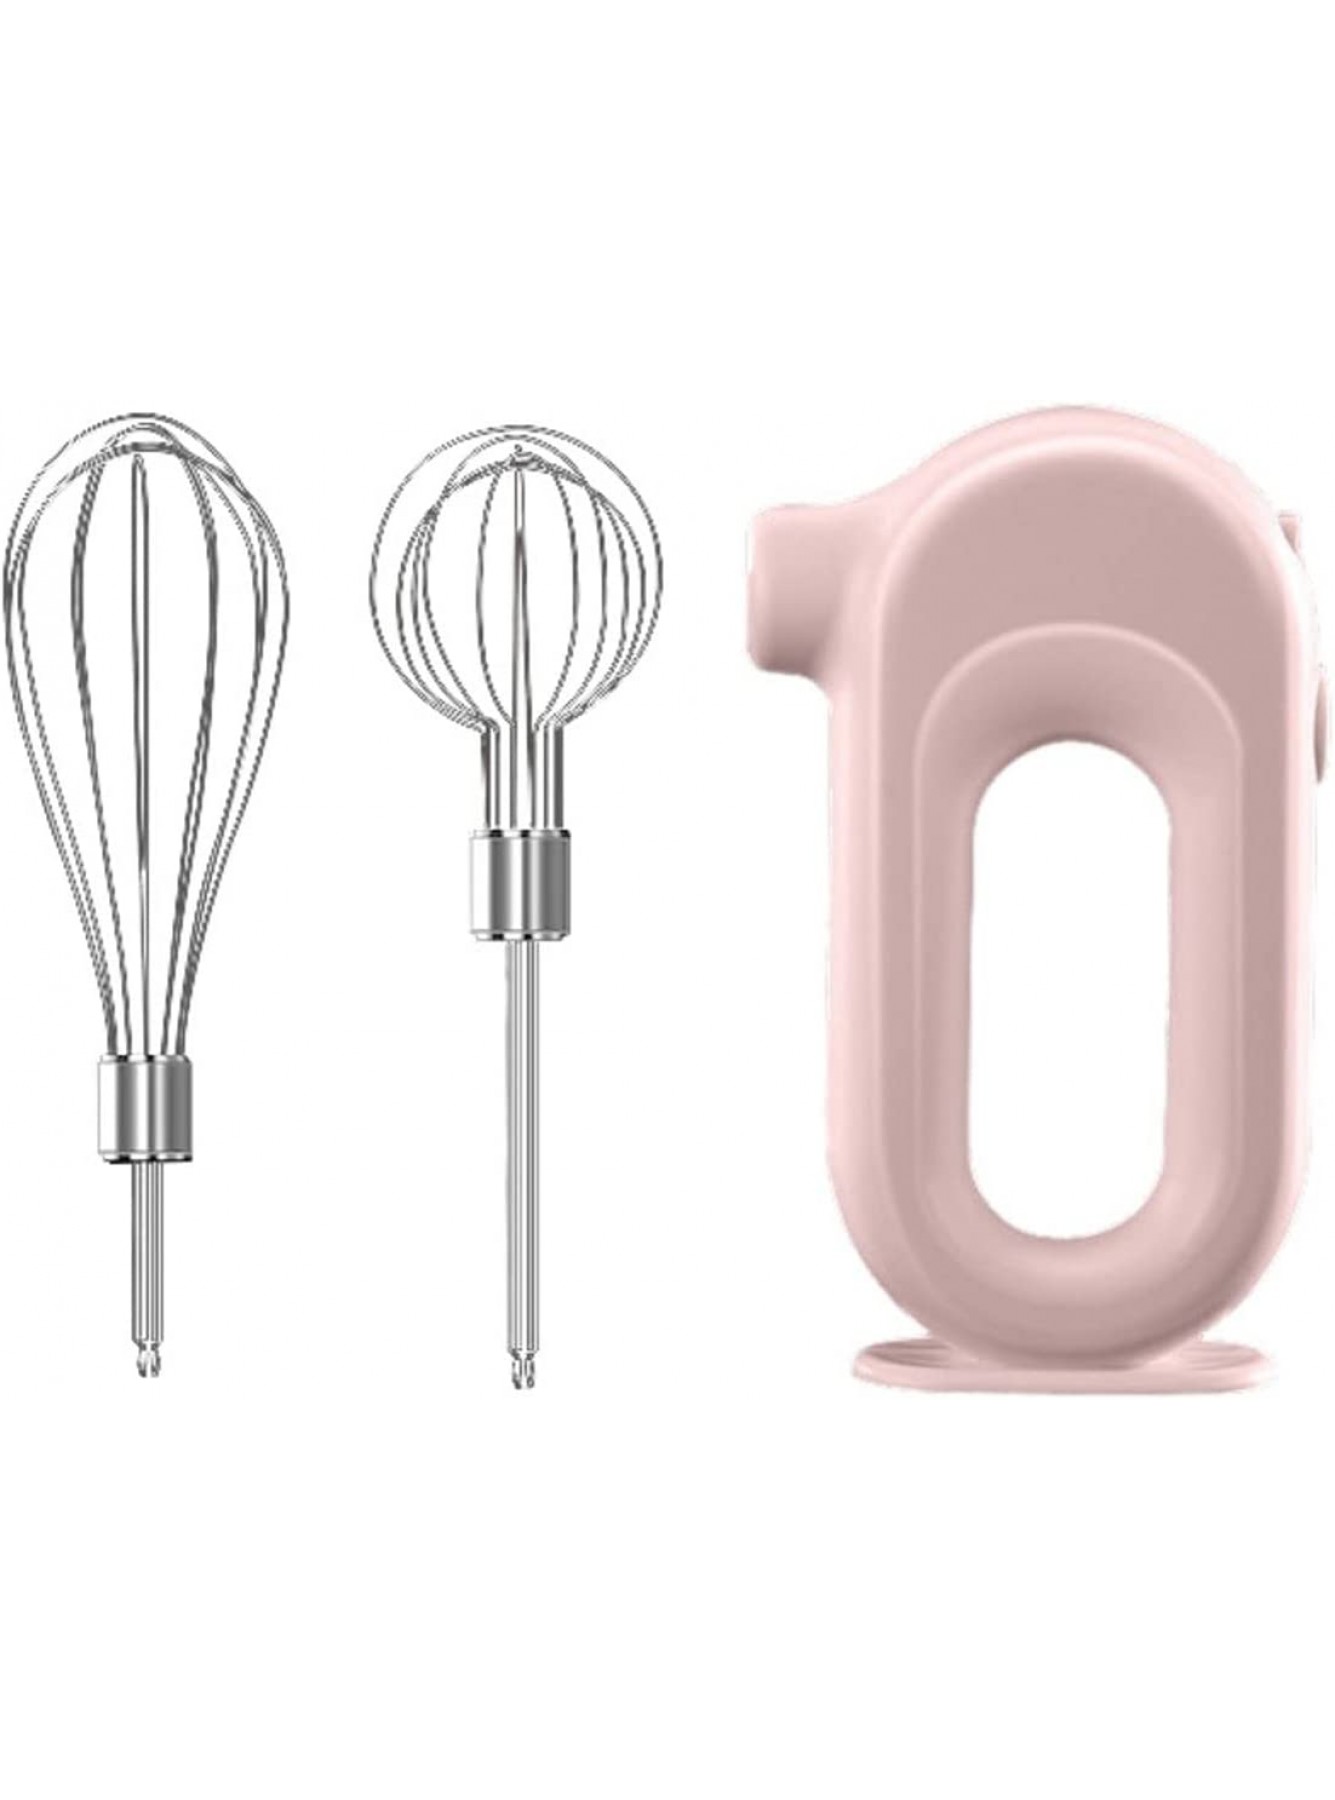 Mini Household Cordless Electric Hand Mixer USB Rechargable Handheld Egg Beater with 2 Detachable Stir Whisks 4 Speed Modes Baking at Home for Kitchen Lightweight Hand Mixers Pink One Size B0B2K55442